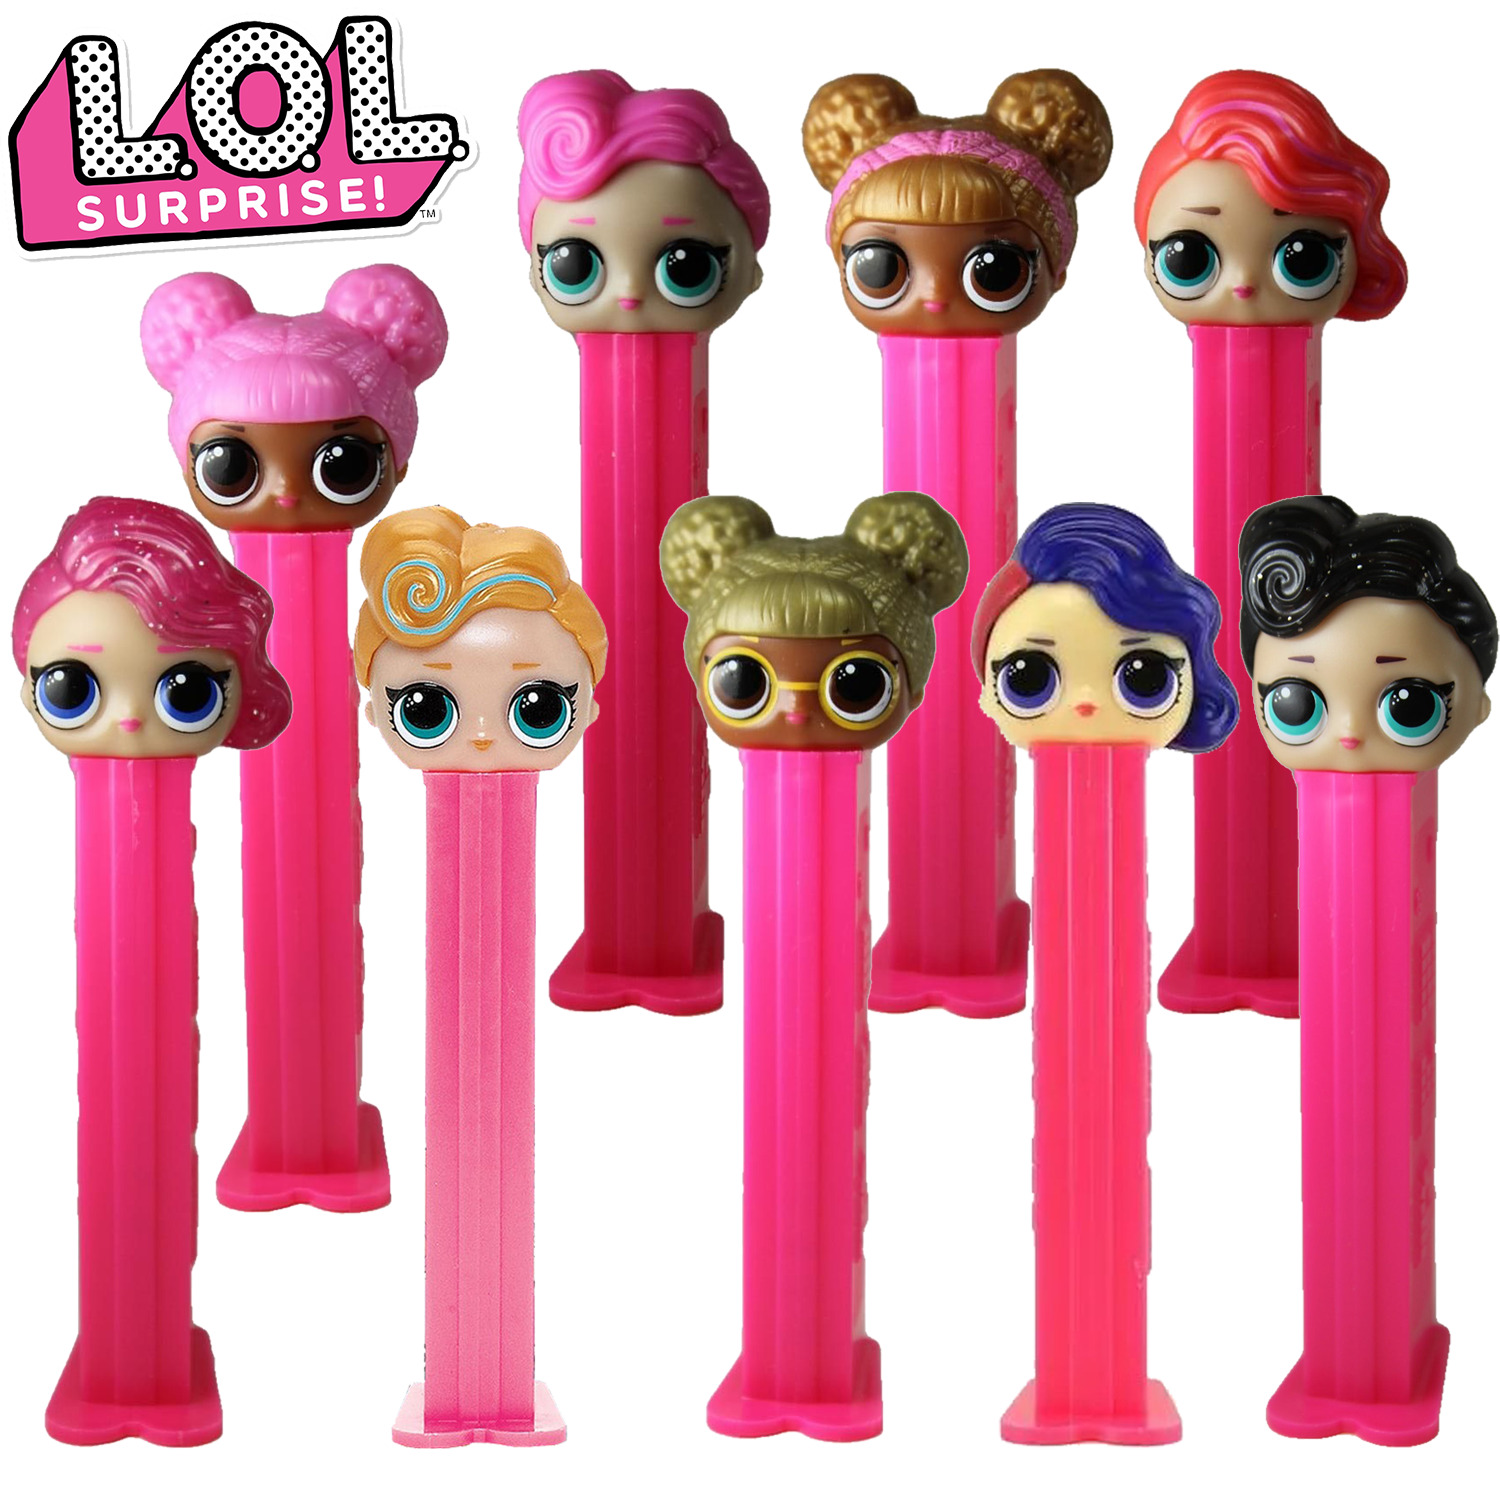 PEZ - LOL SURPRISE! Candy dispenser and candy refill set - Cheeky Babe